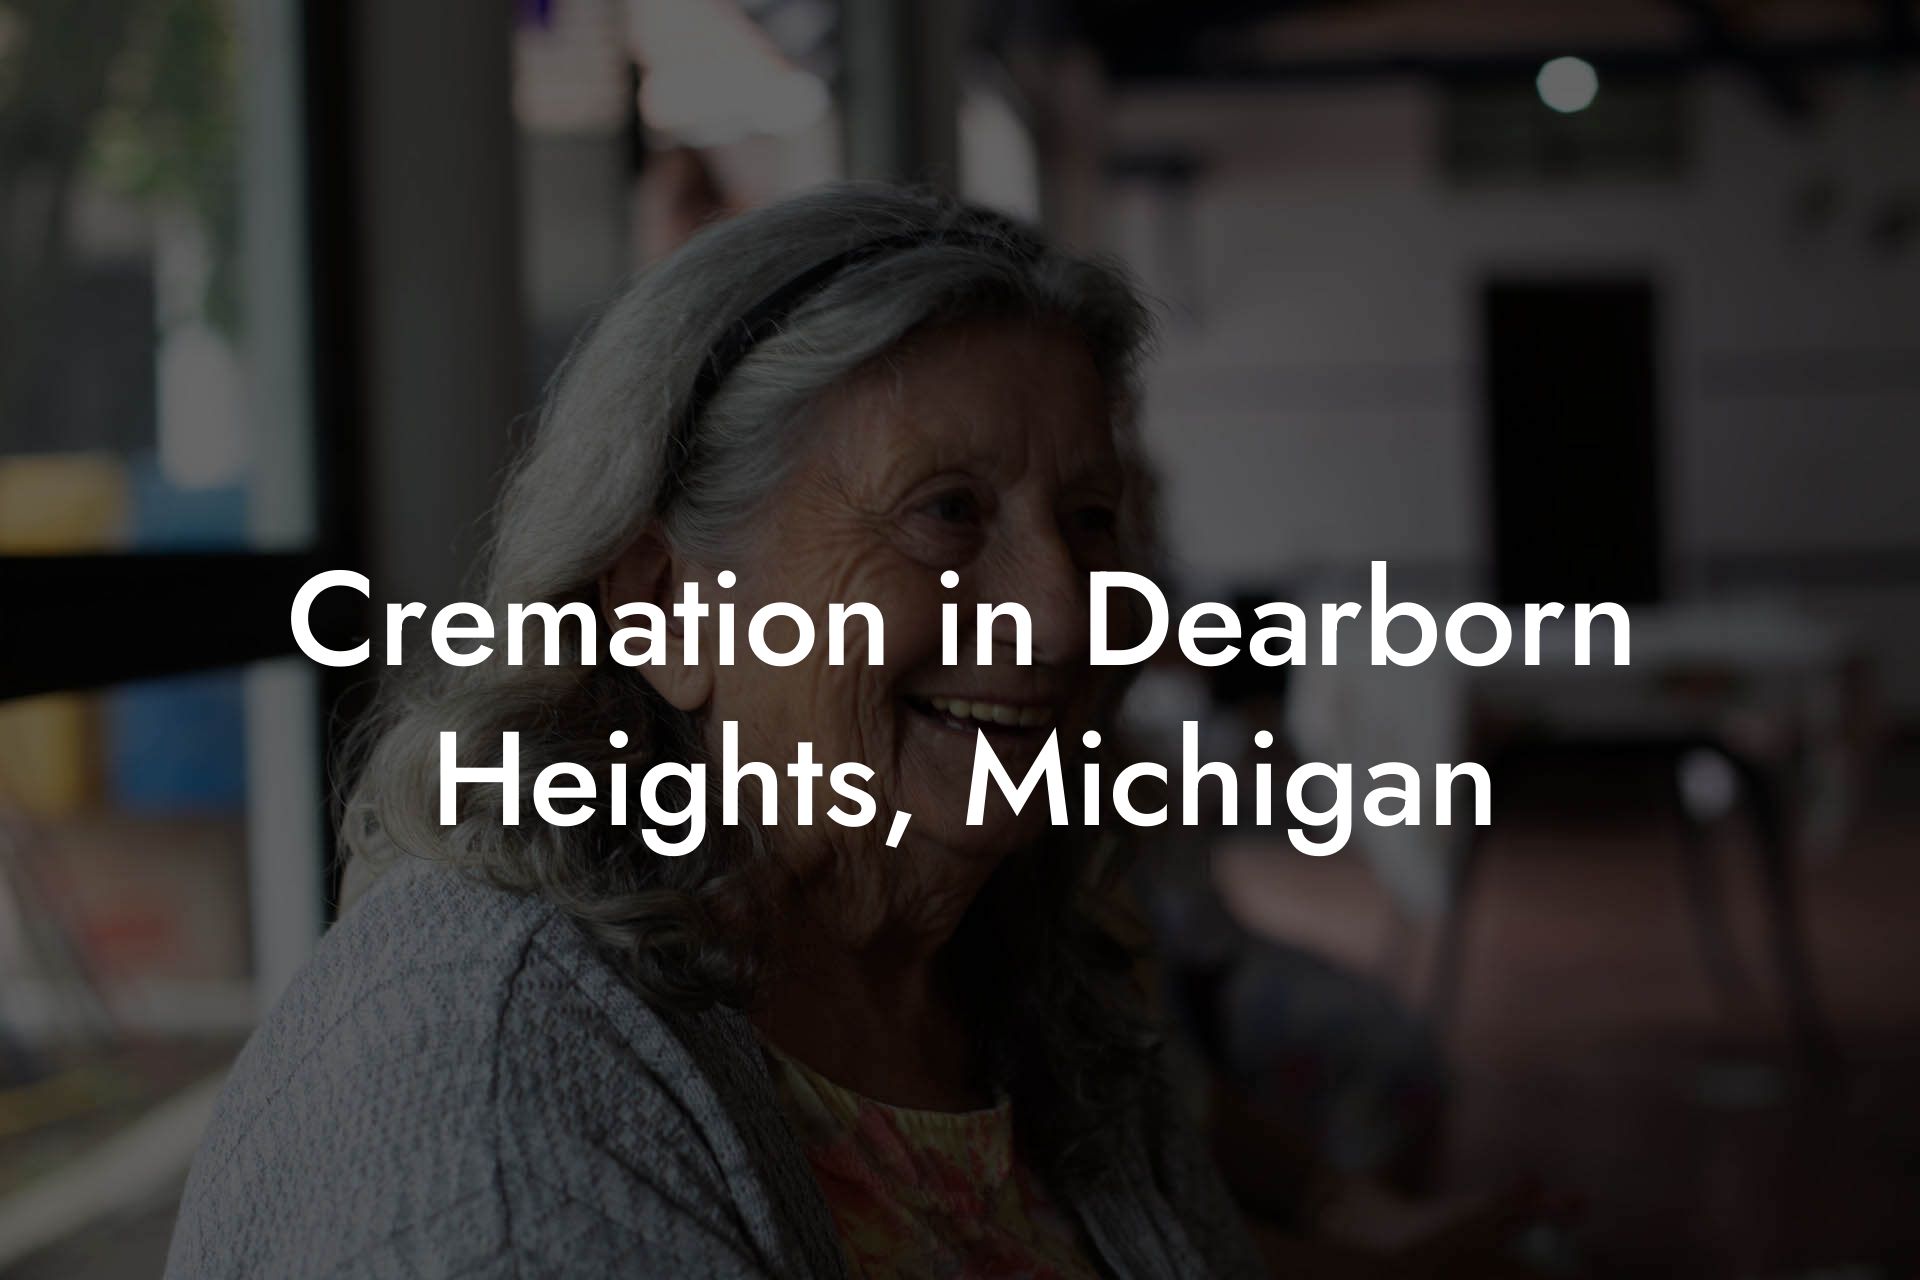 Cremation in Dearborn Heights, Michigan